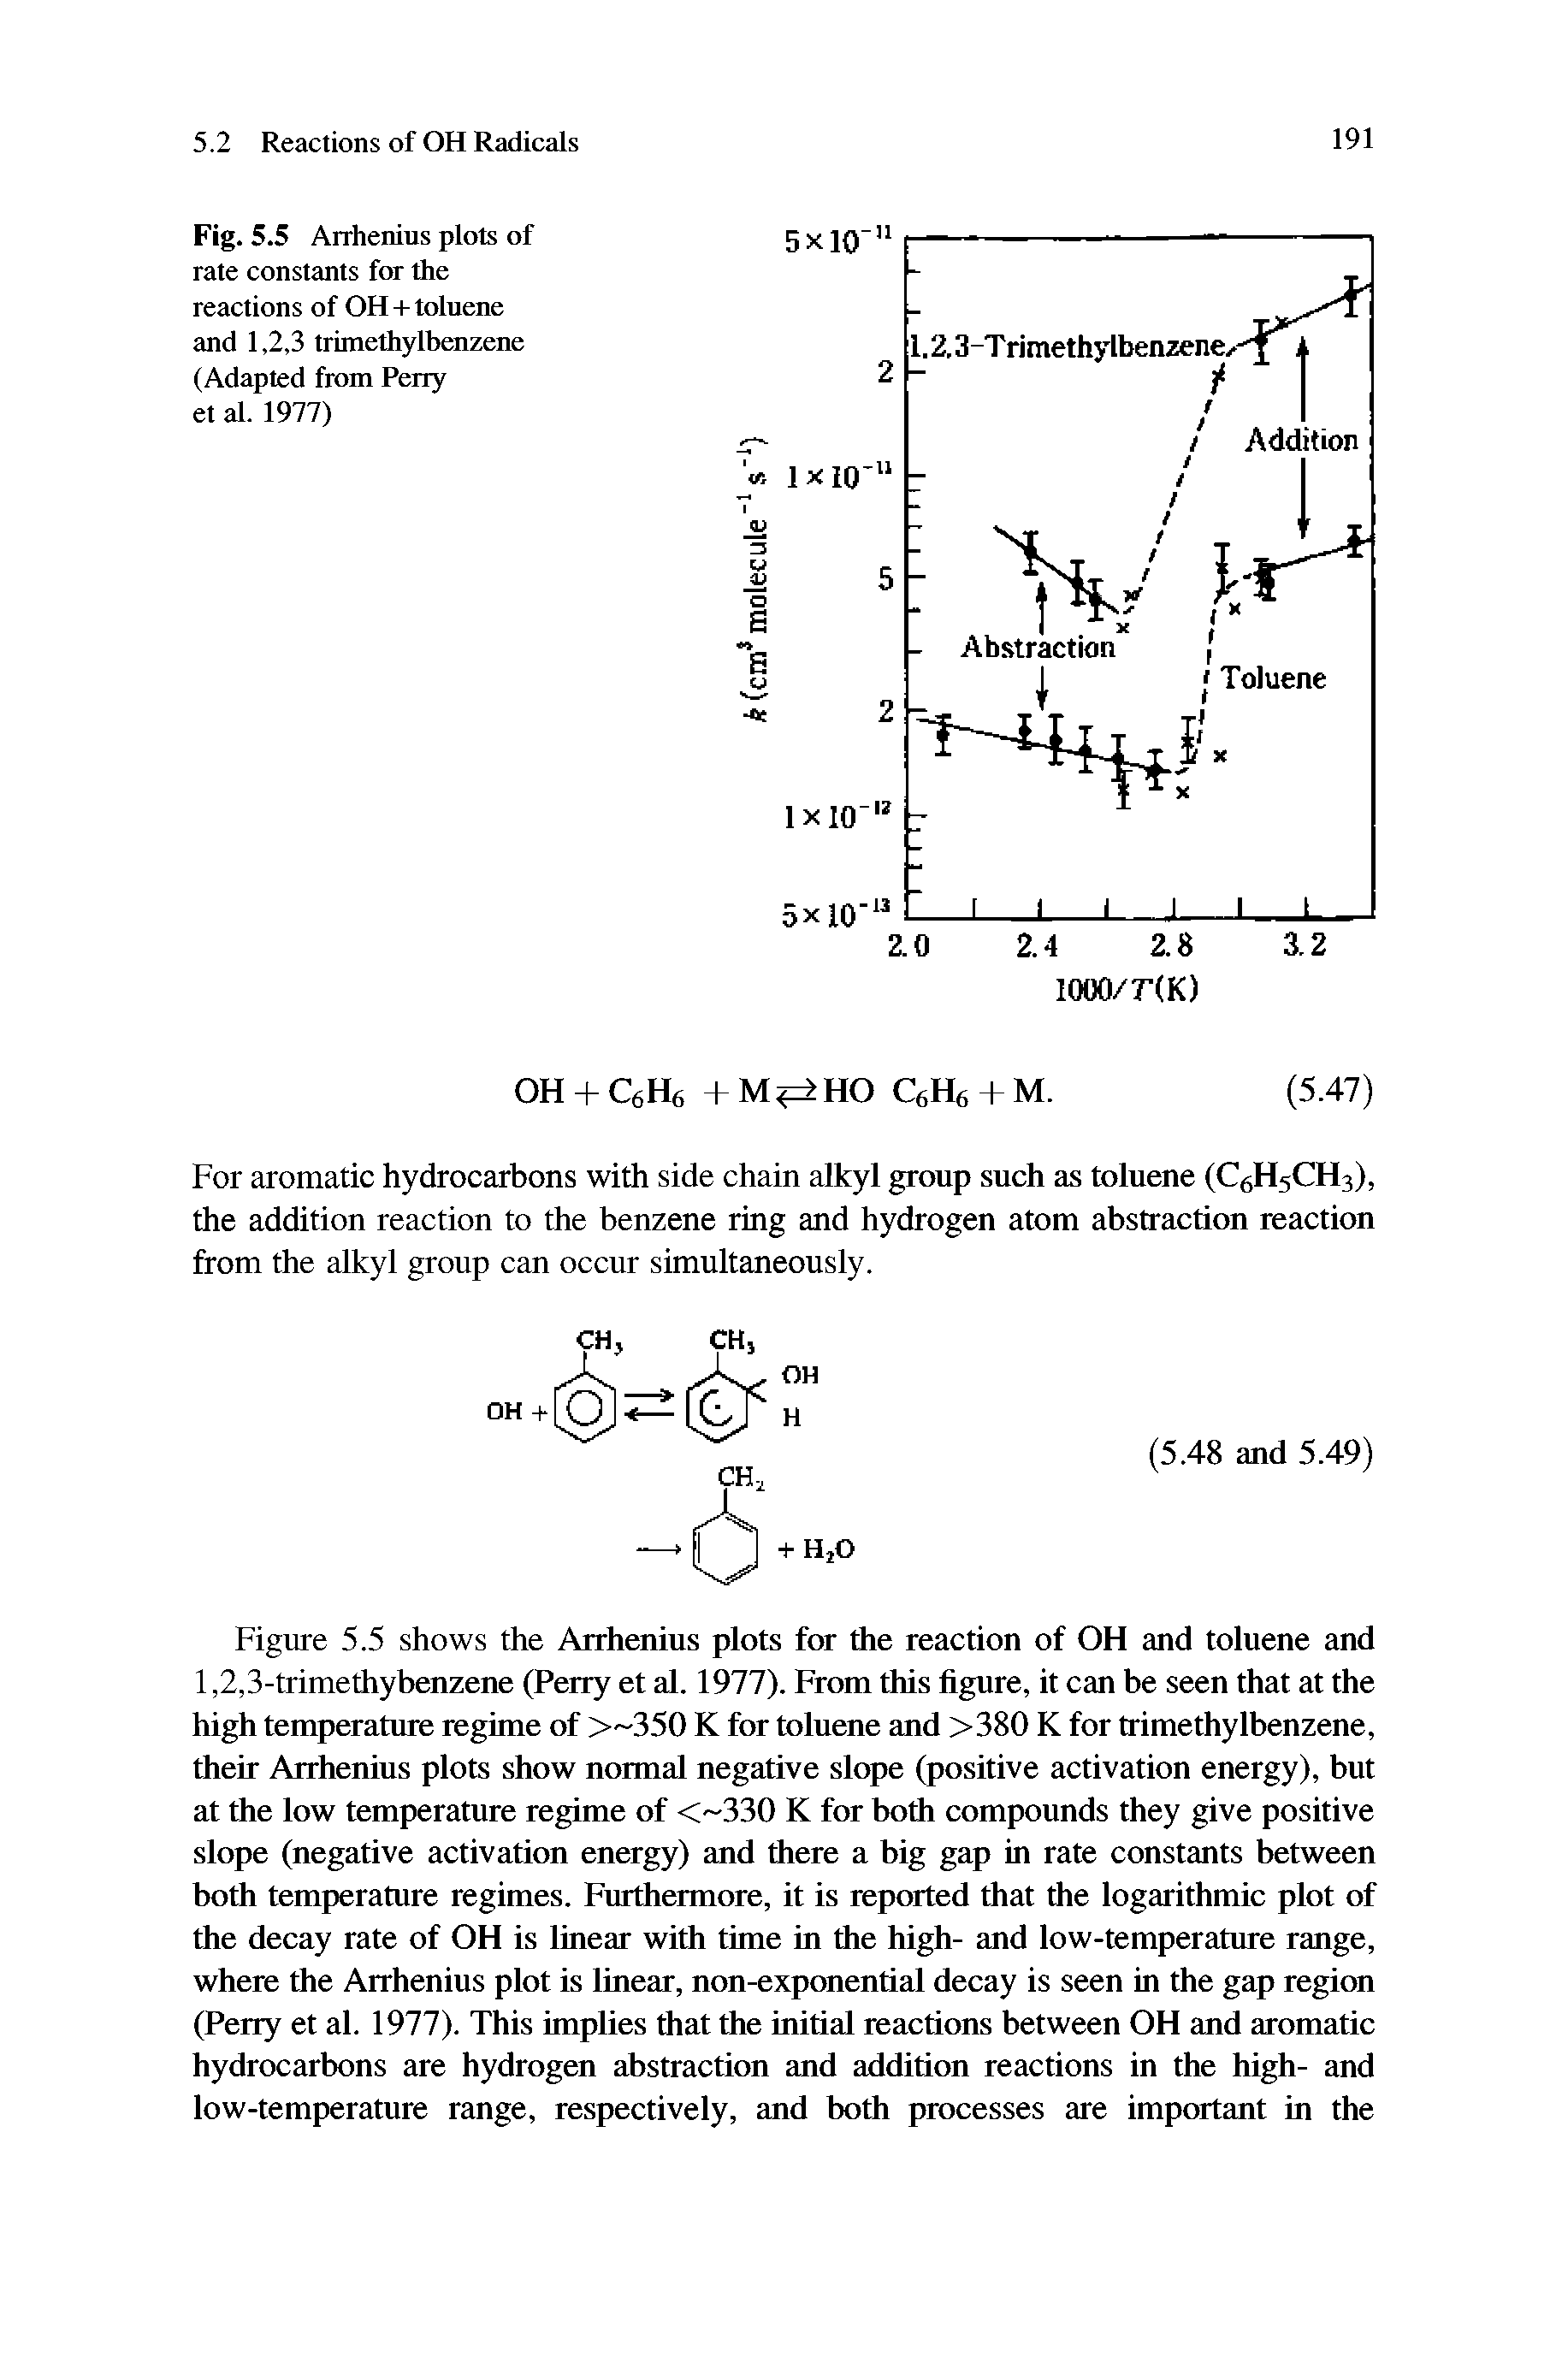 Fig. 5.5 Arrhenius plots of rate constants for the reactions of OH + toluene and 1,2,3 trimethylbenzene (Adapted from Perry et al. 1977)...